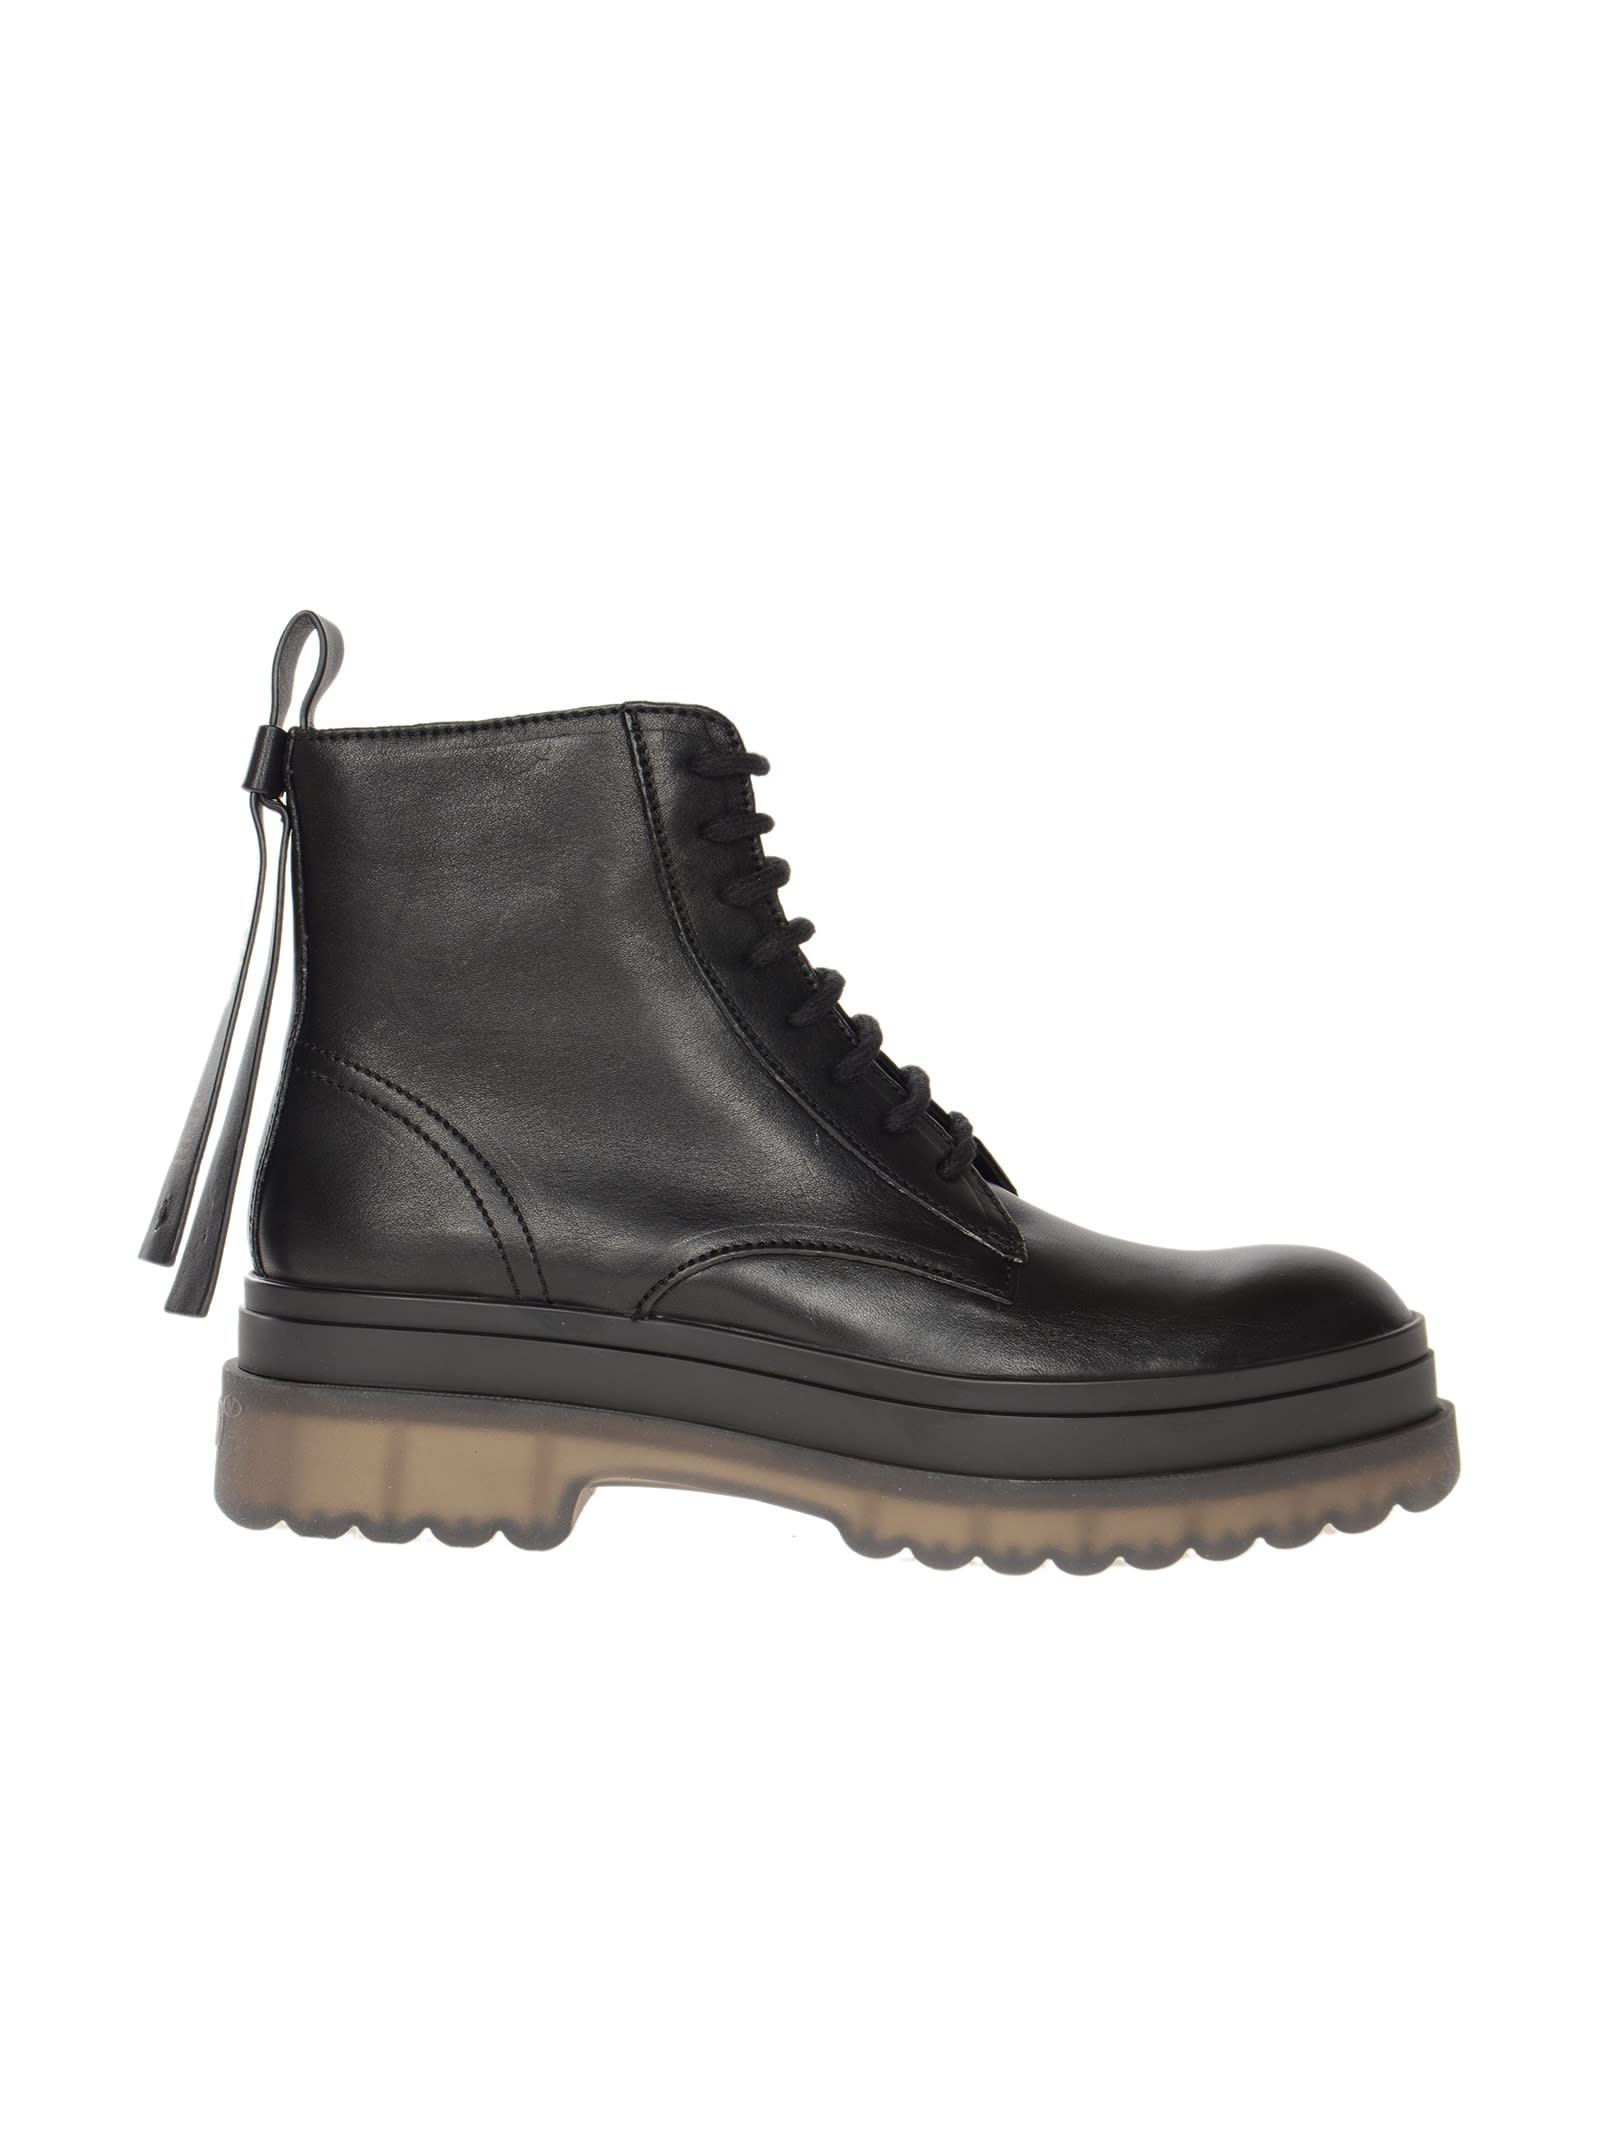 RED Valentino Side Zip Lace-up Combat Boots